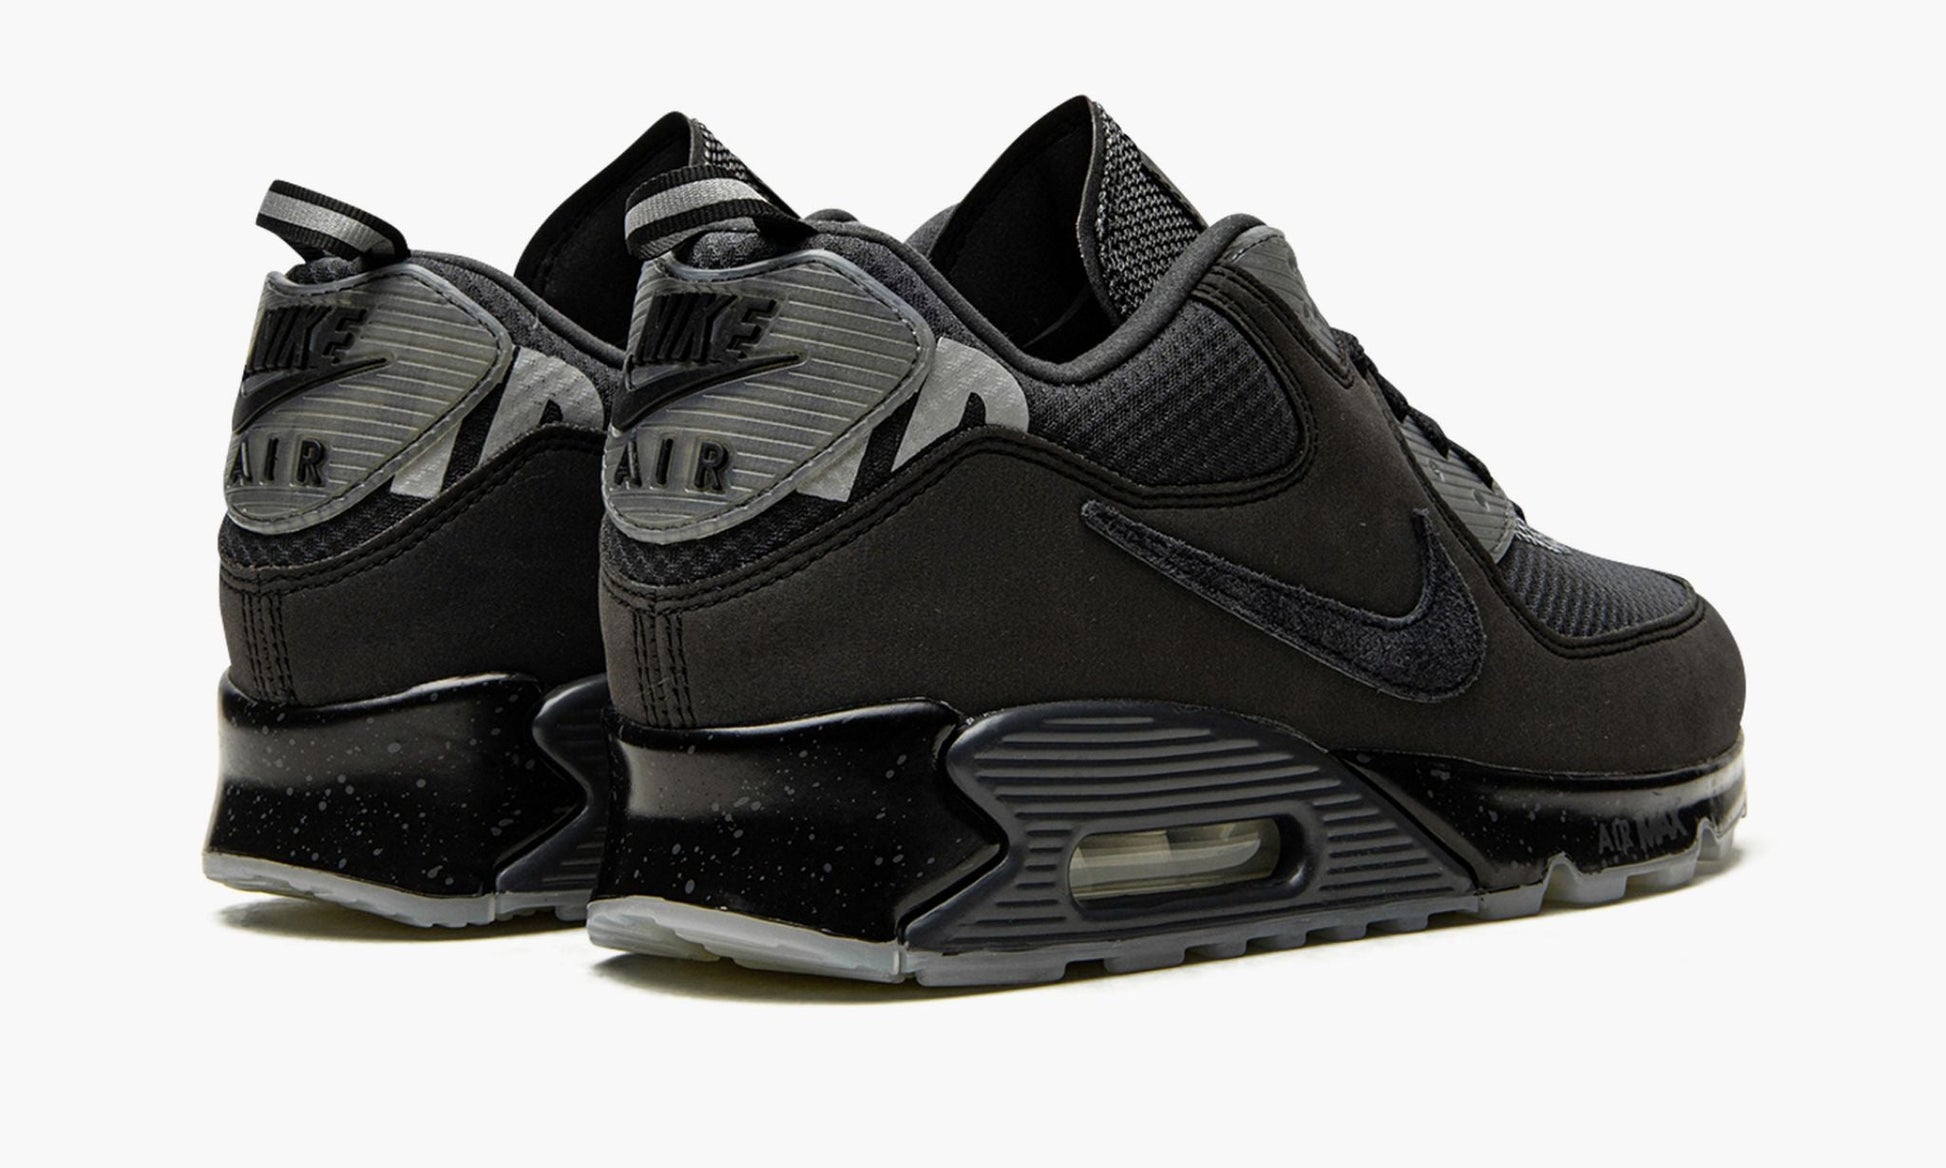 Air Max 90 "Undefeated - Black"